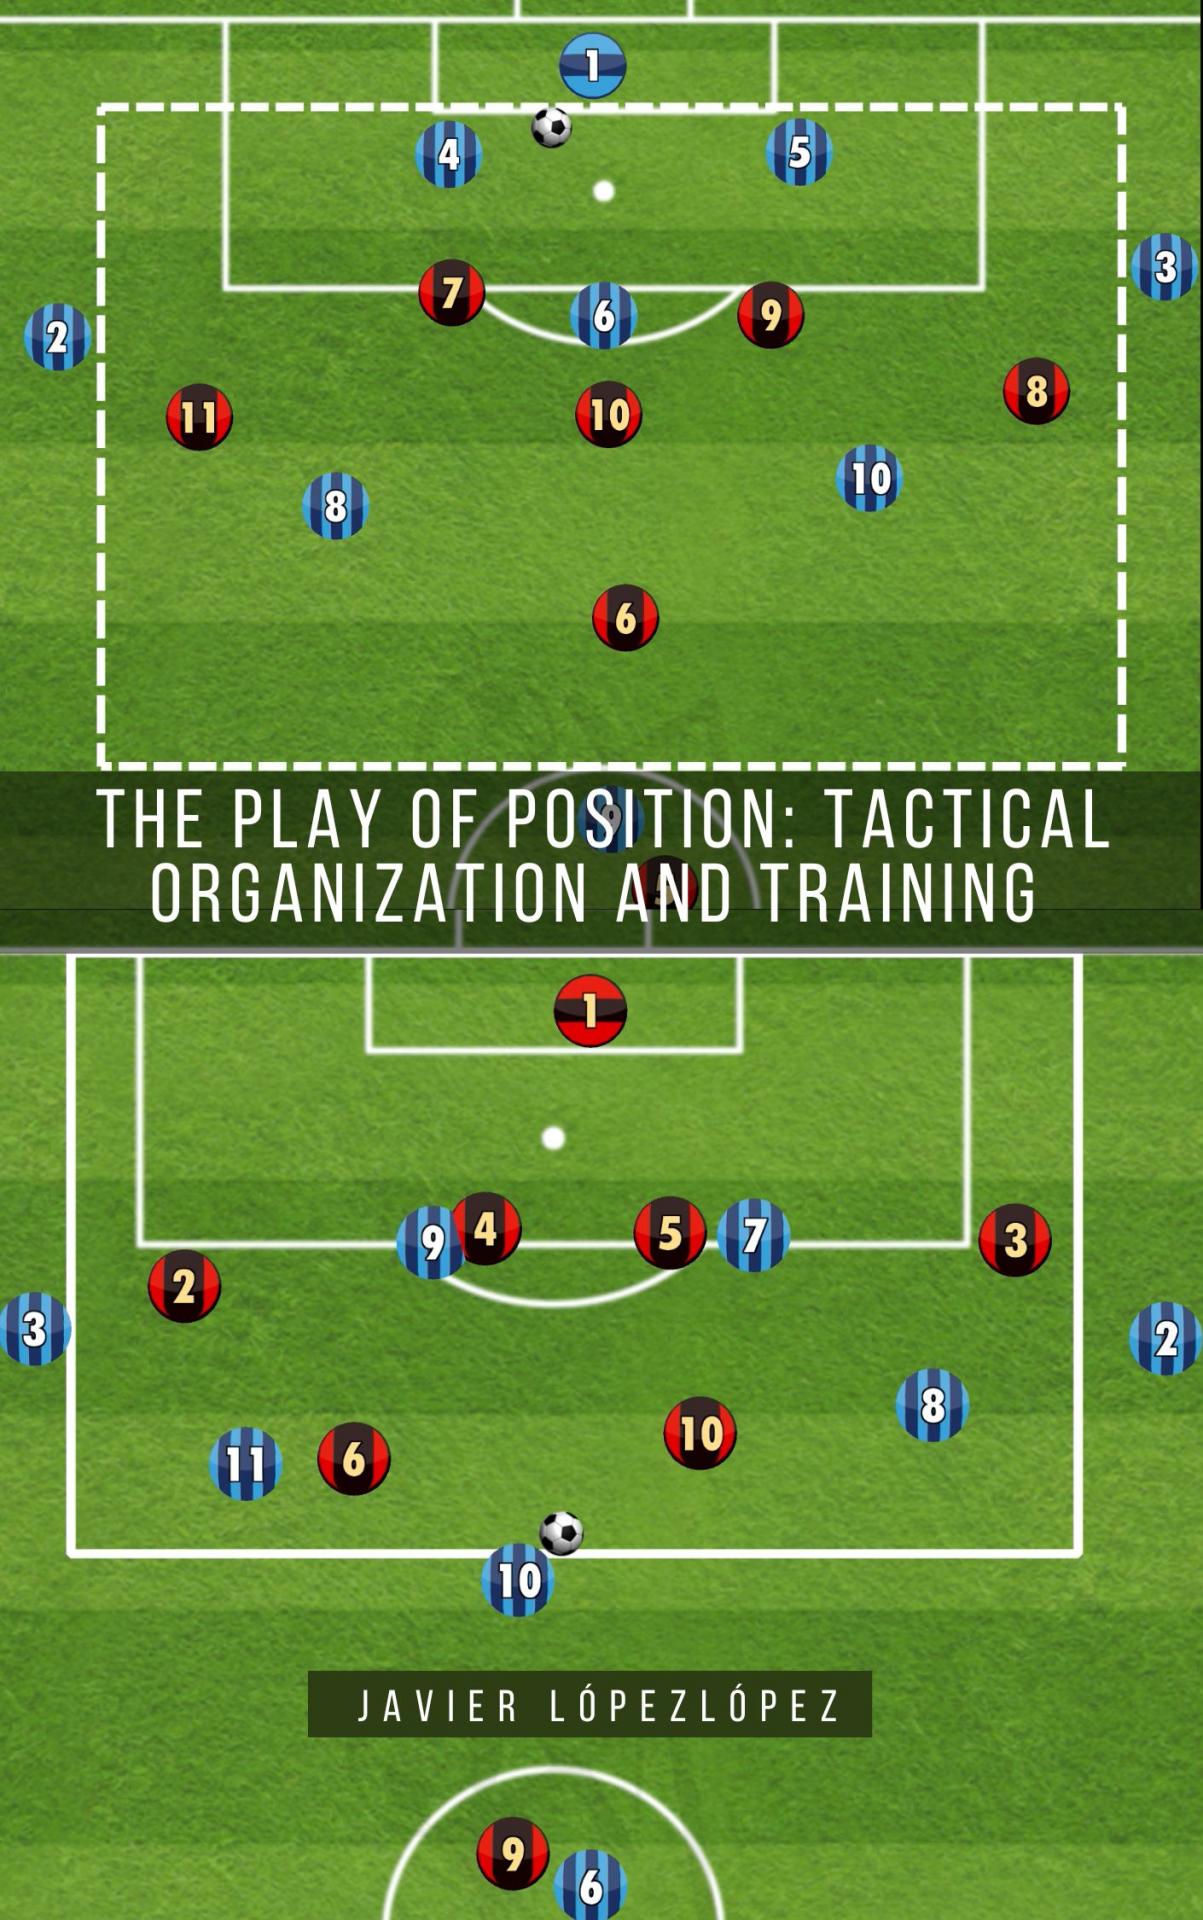 THE PLAY OF POSITION: Tactical organization and training 